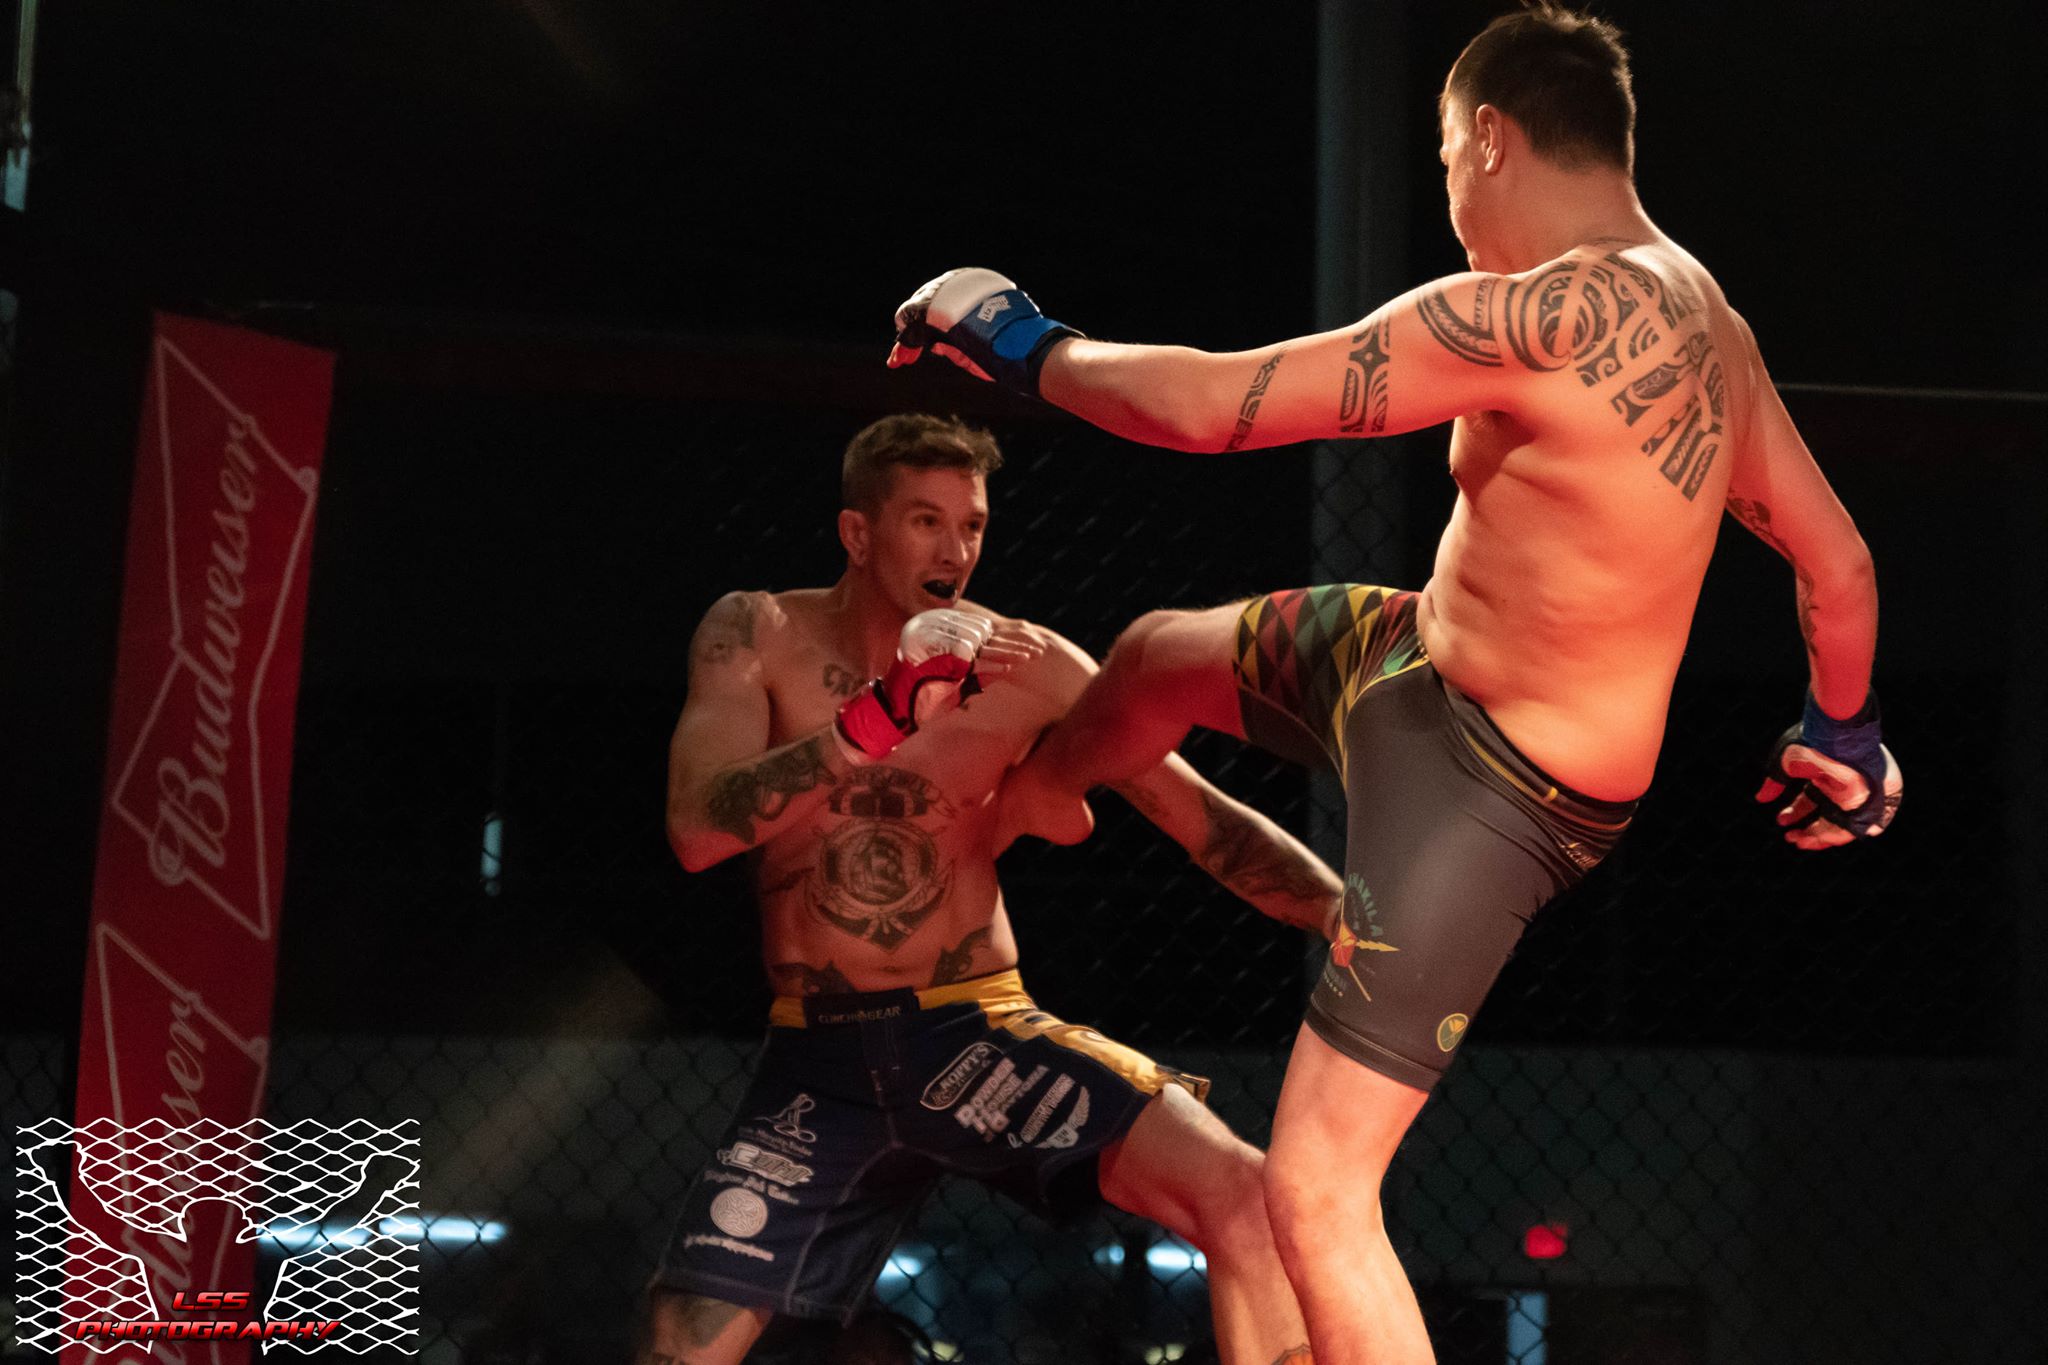 Ben Moser vs Avery Sanchis - Art of War 9 - Photo by Lance Stein of LSS Photography